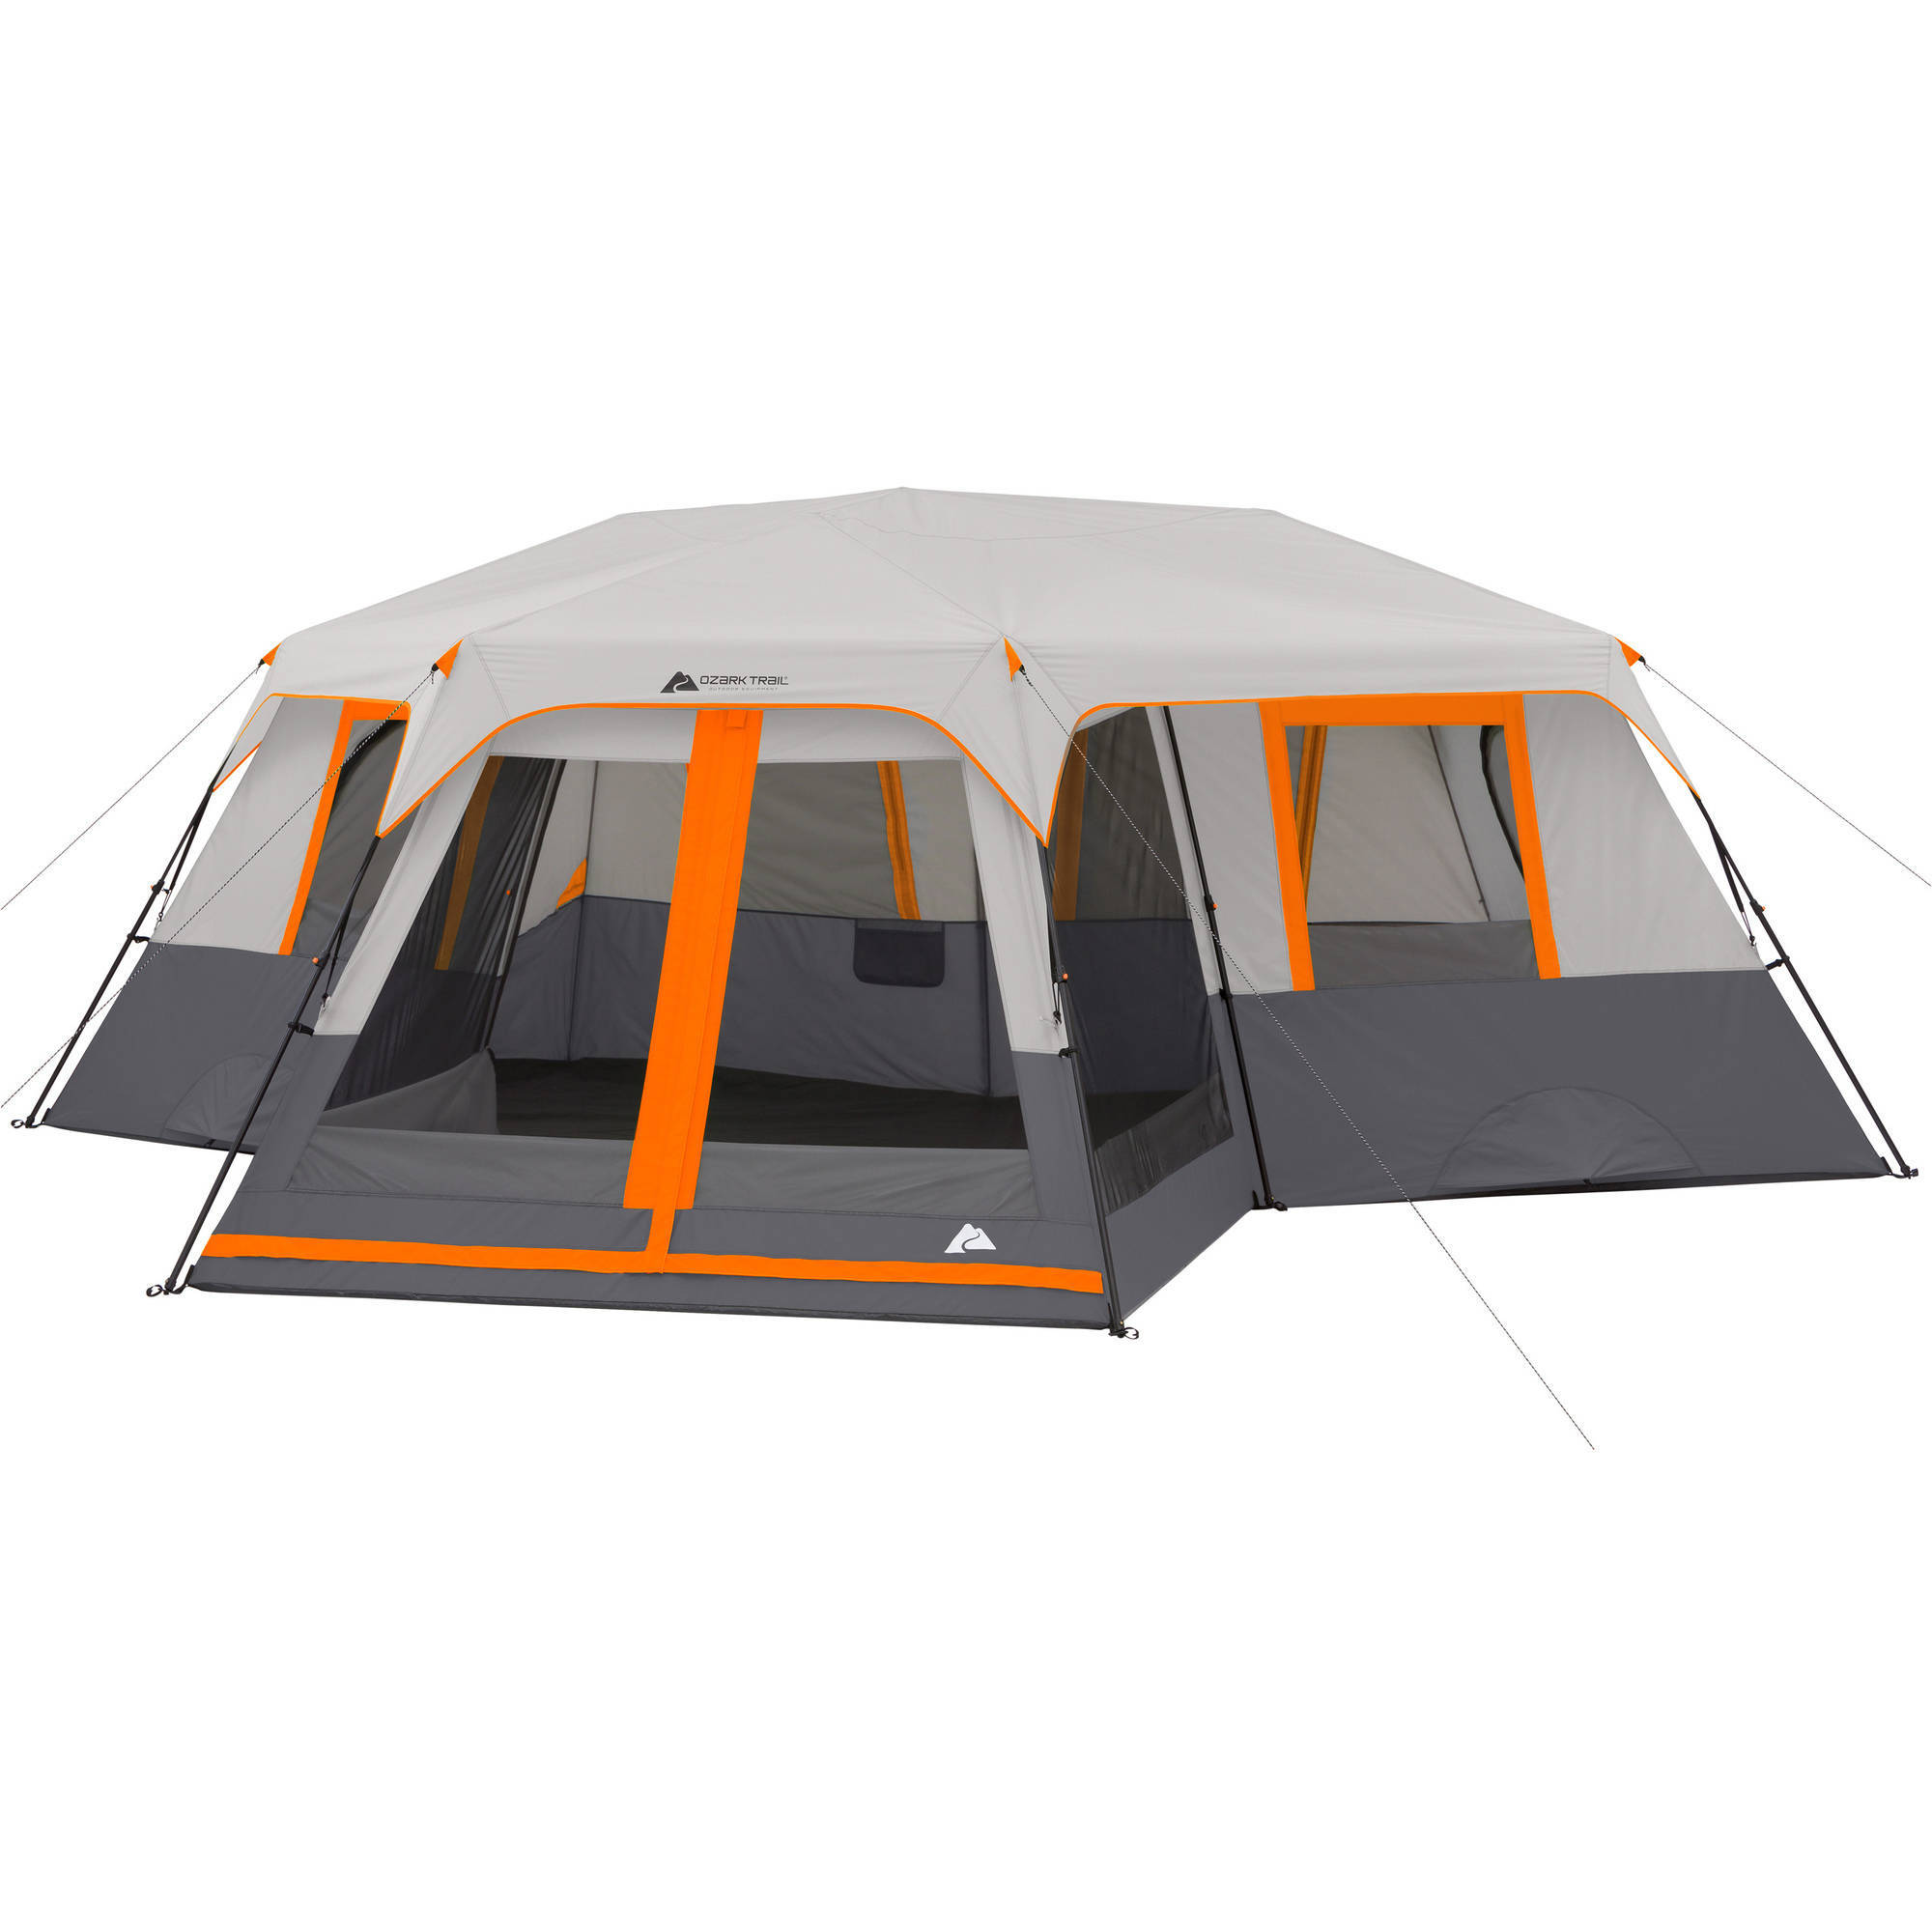 Ozark Trail 20' x 18' 12-Person 3-Room Instant Cabin Tent with Screen Room, 56.5 lbs - image 1 of 12